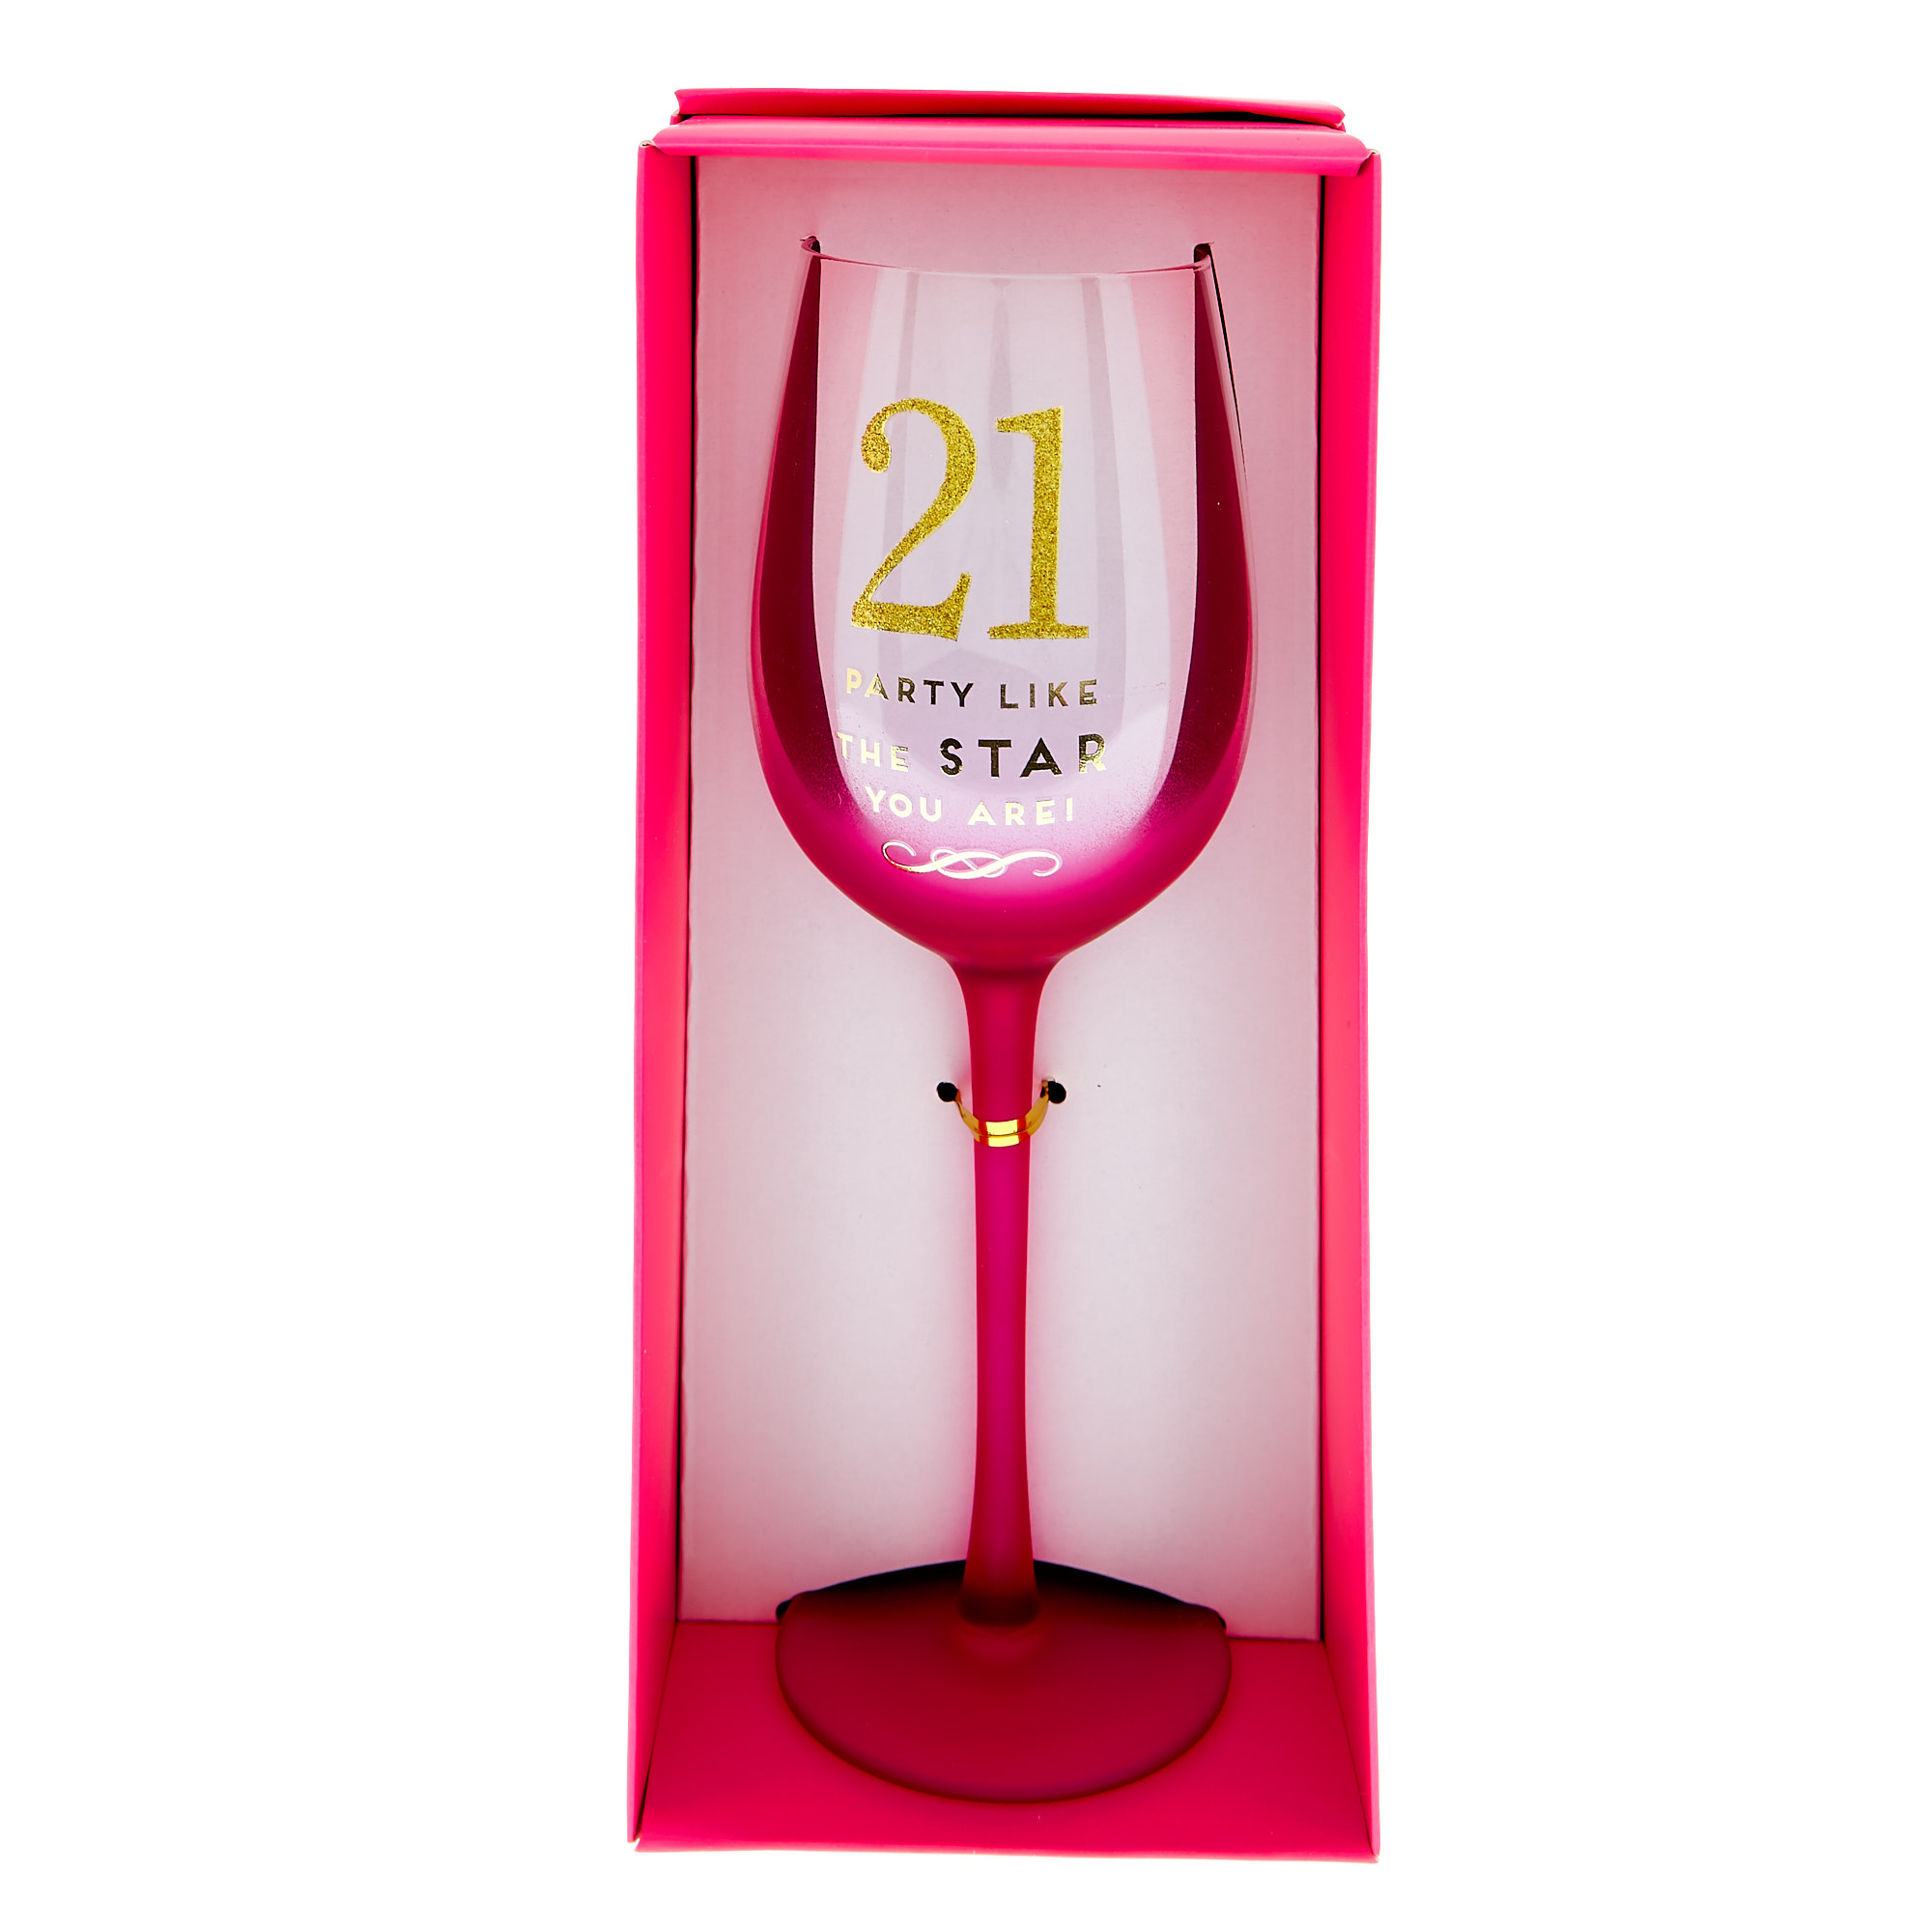 21st Birthday Wine Glass - The Star You Are 